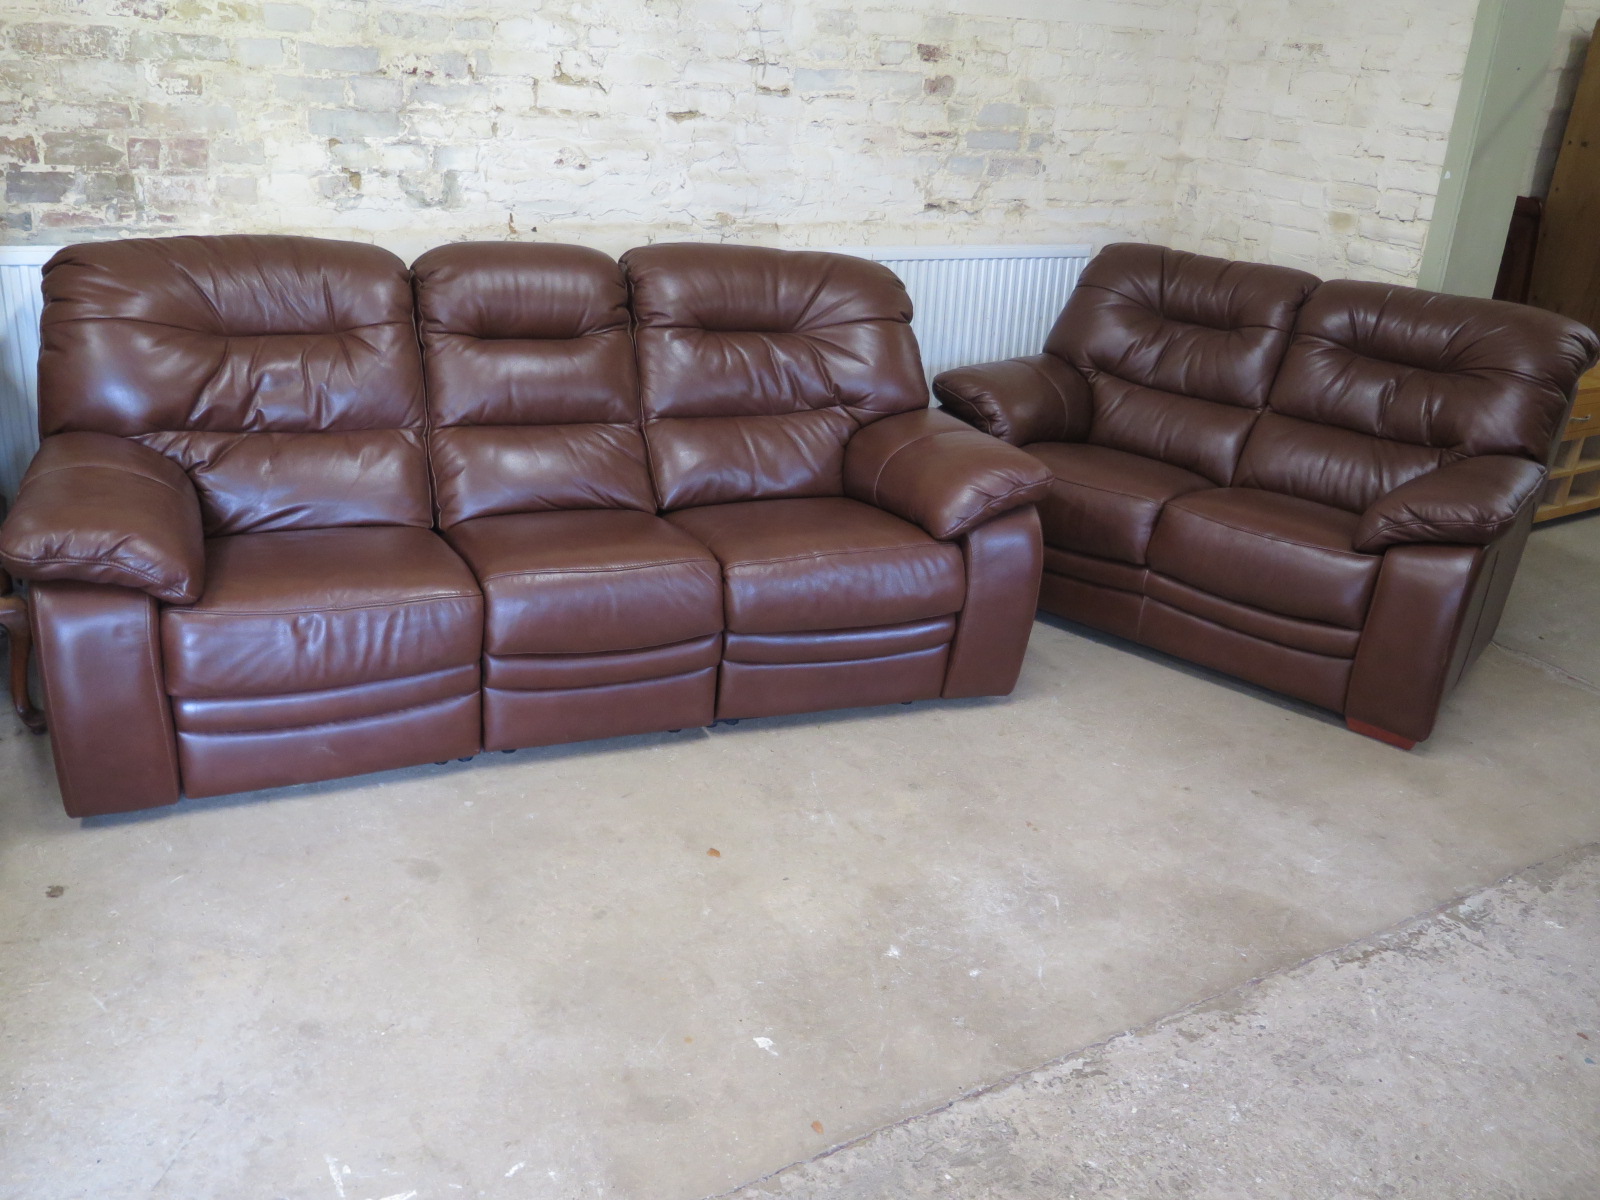 A brown leather two seater sofa and a three seater sofa with end recliners,